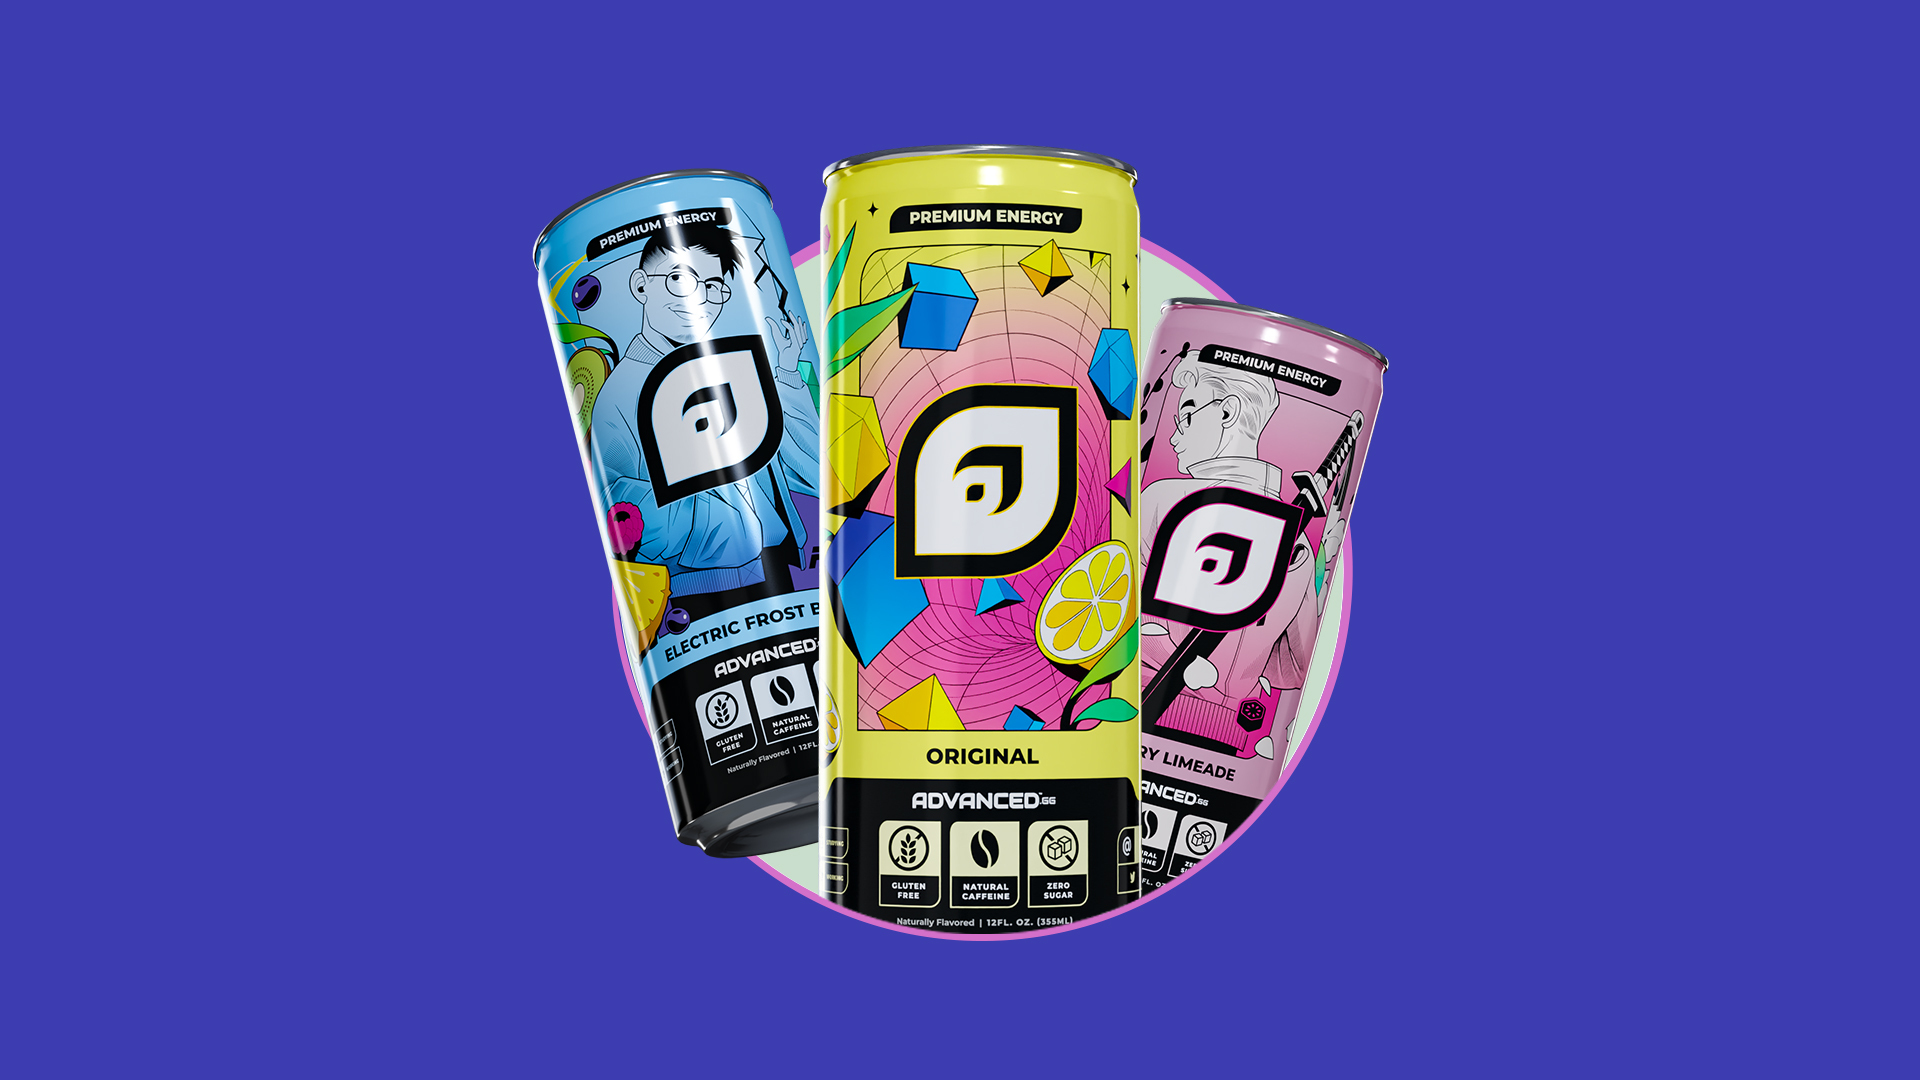 How Advanced GG found winning package designs and beat out competition